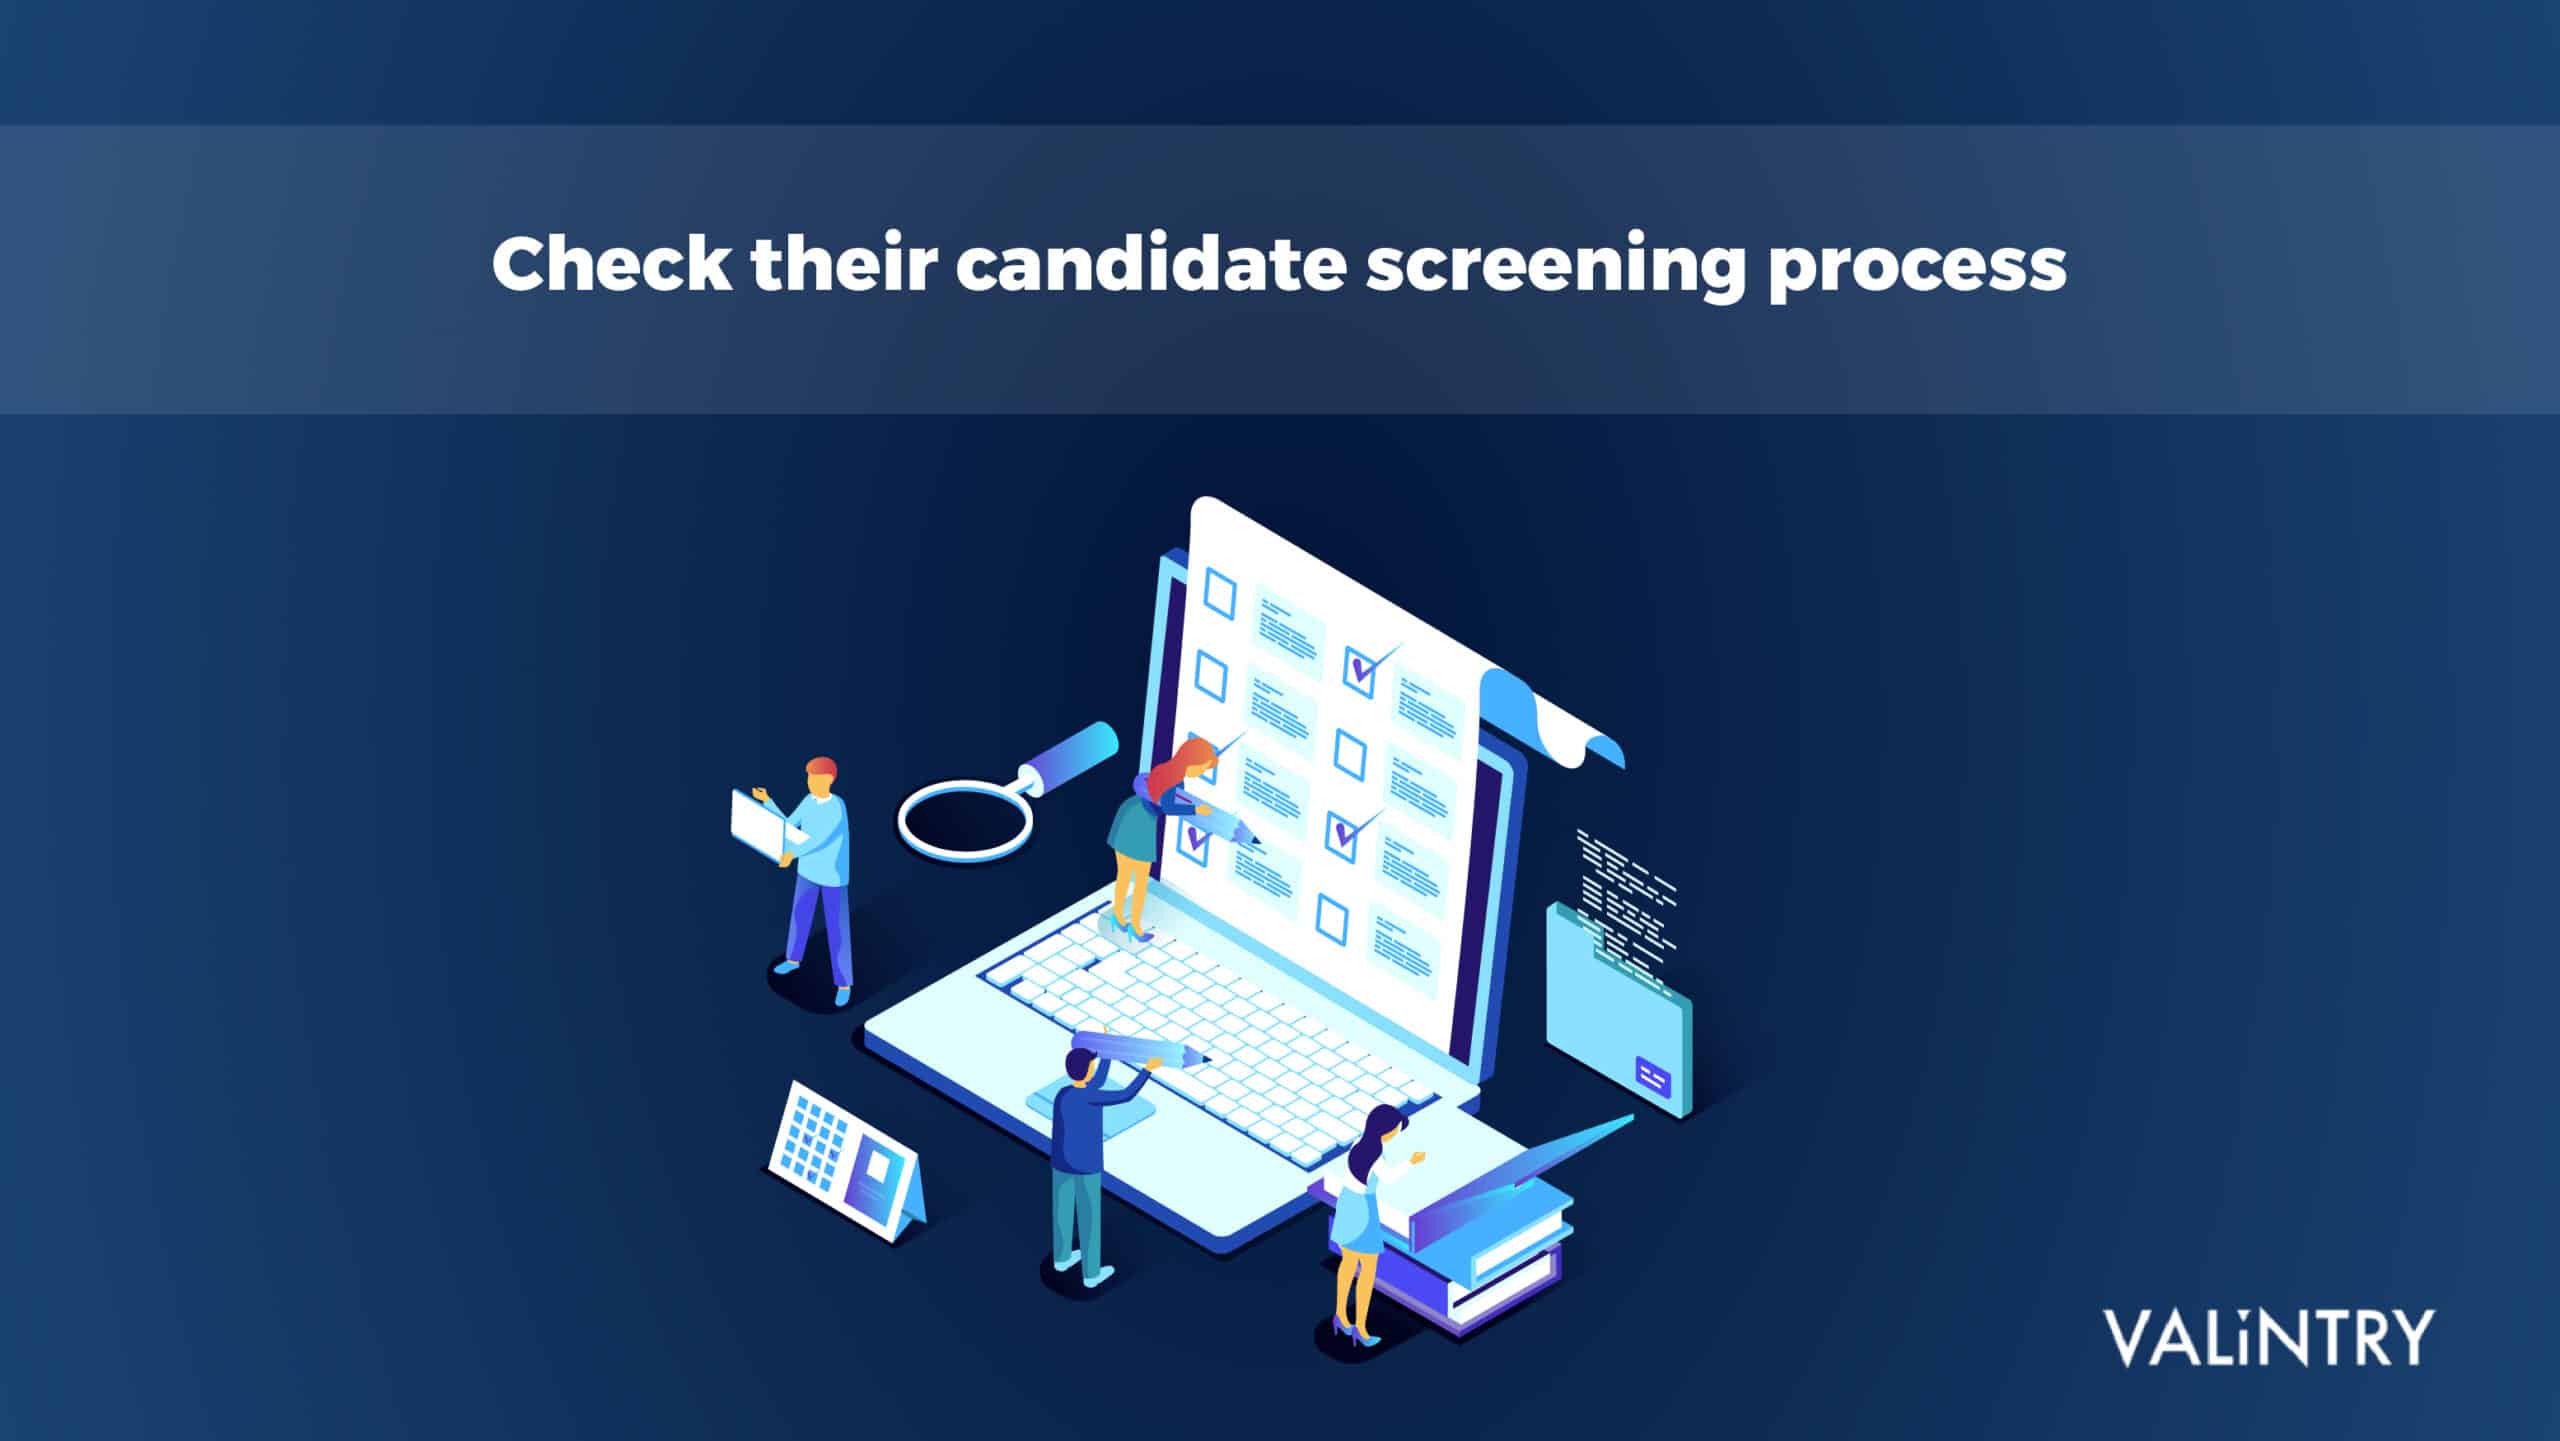 Check their candidate screening process